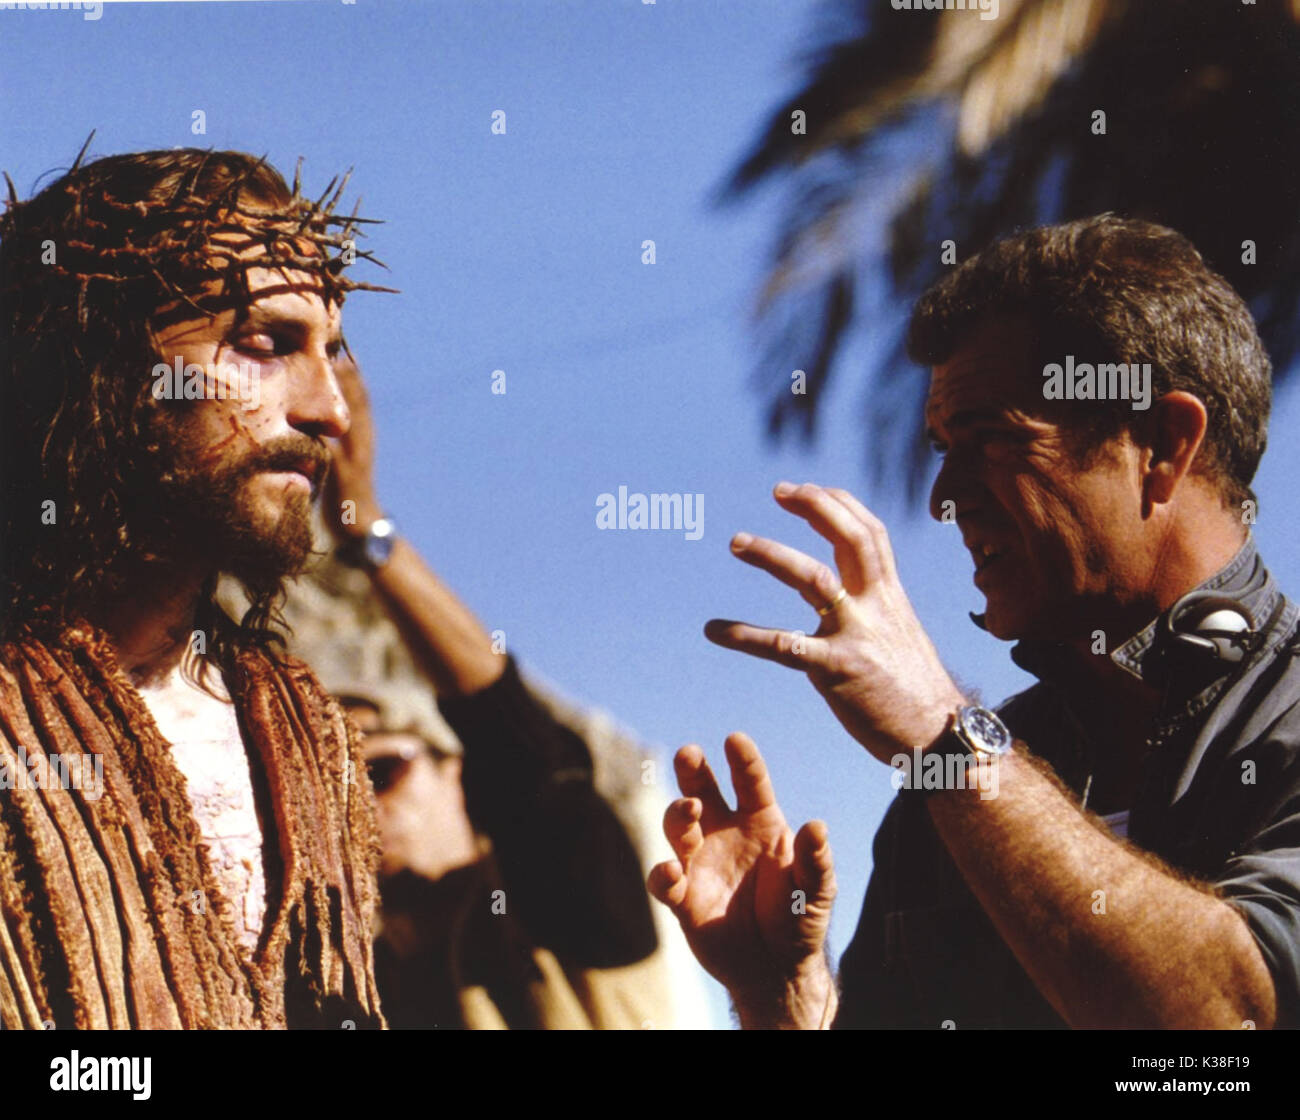 production pictures from the passion of christ movie